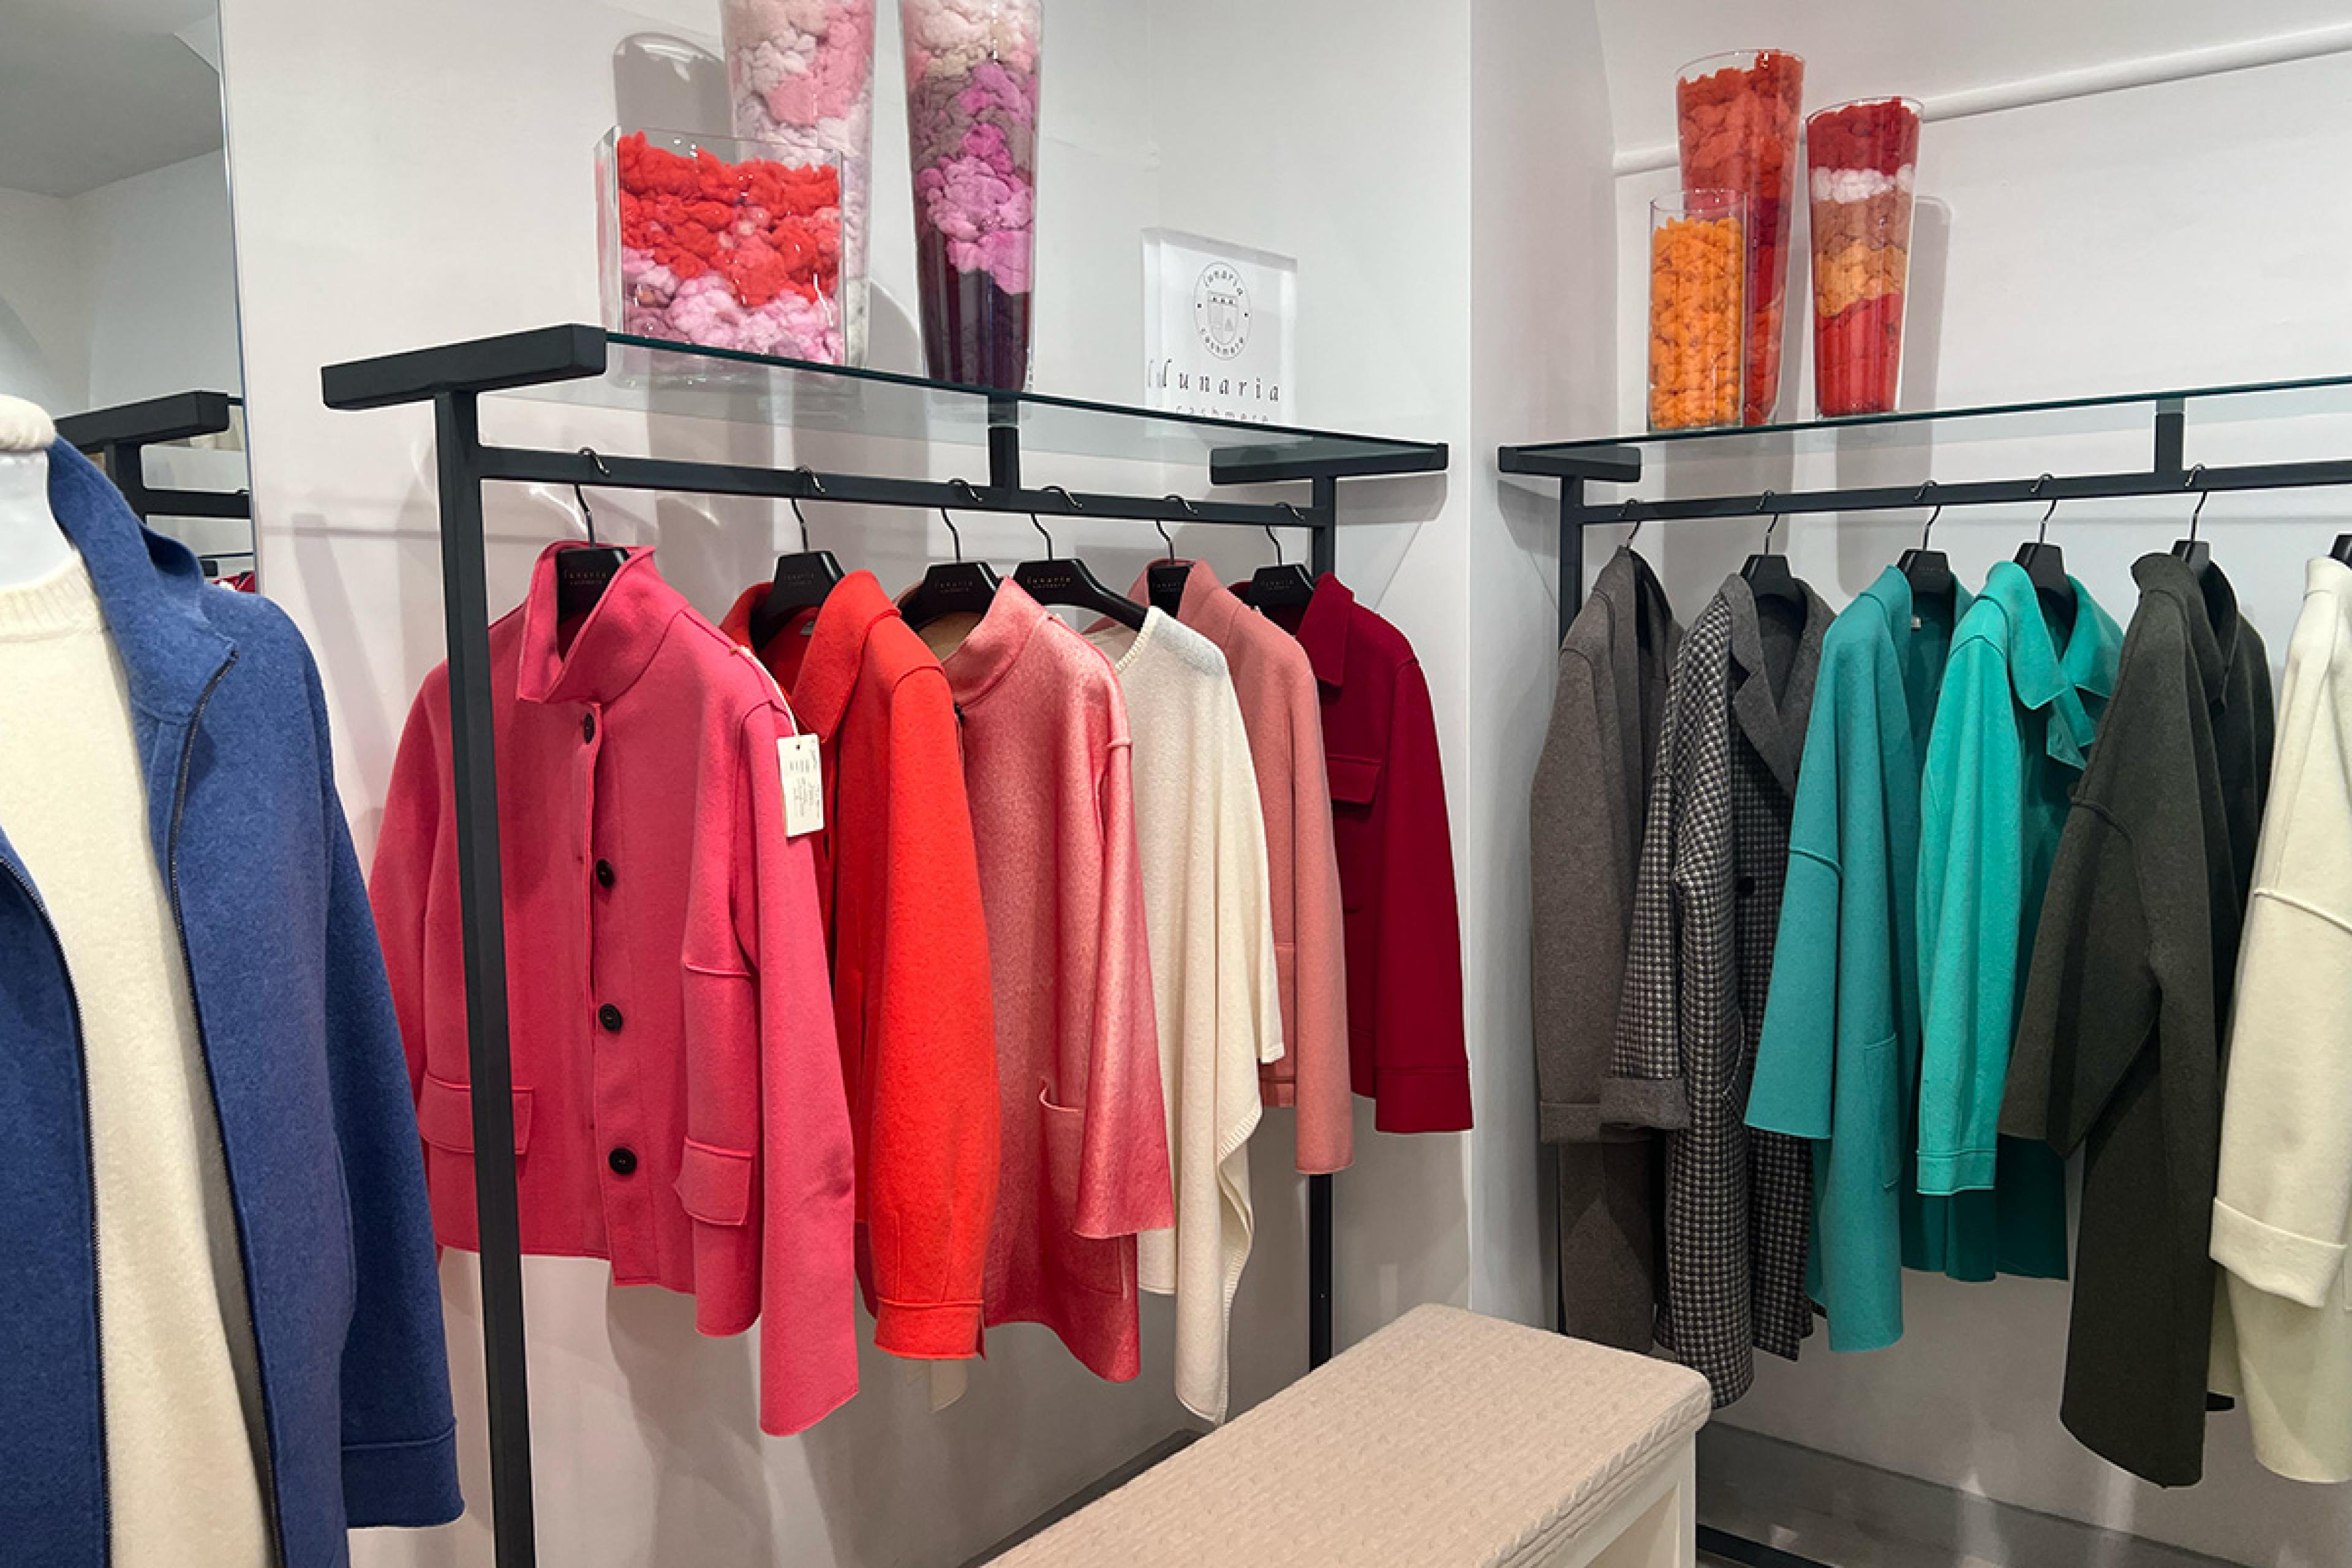 black clothing racks with colorful cashmere